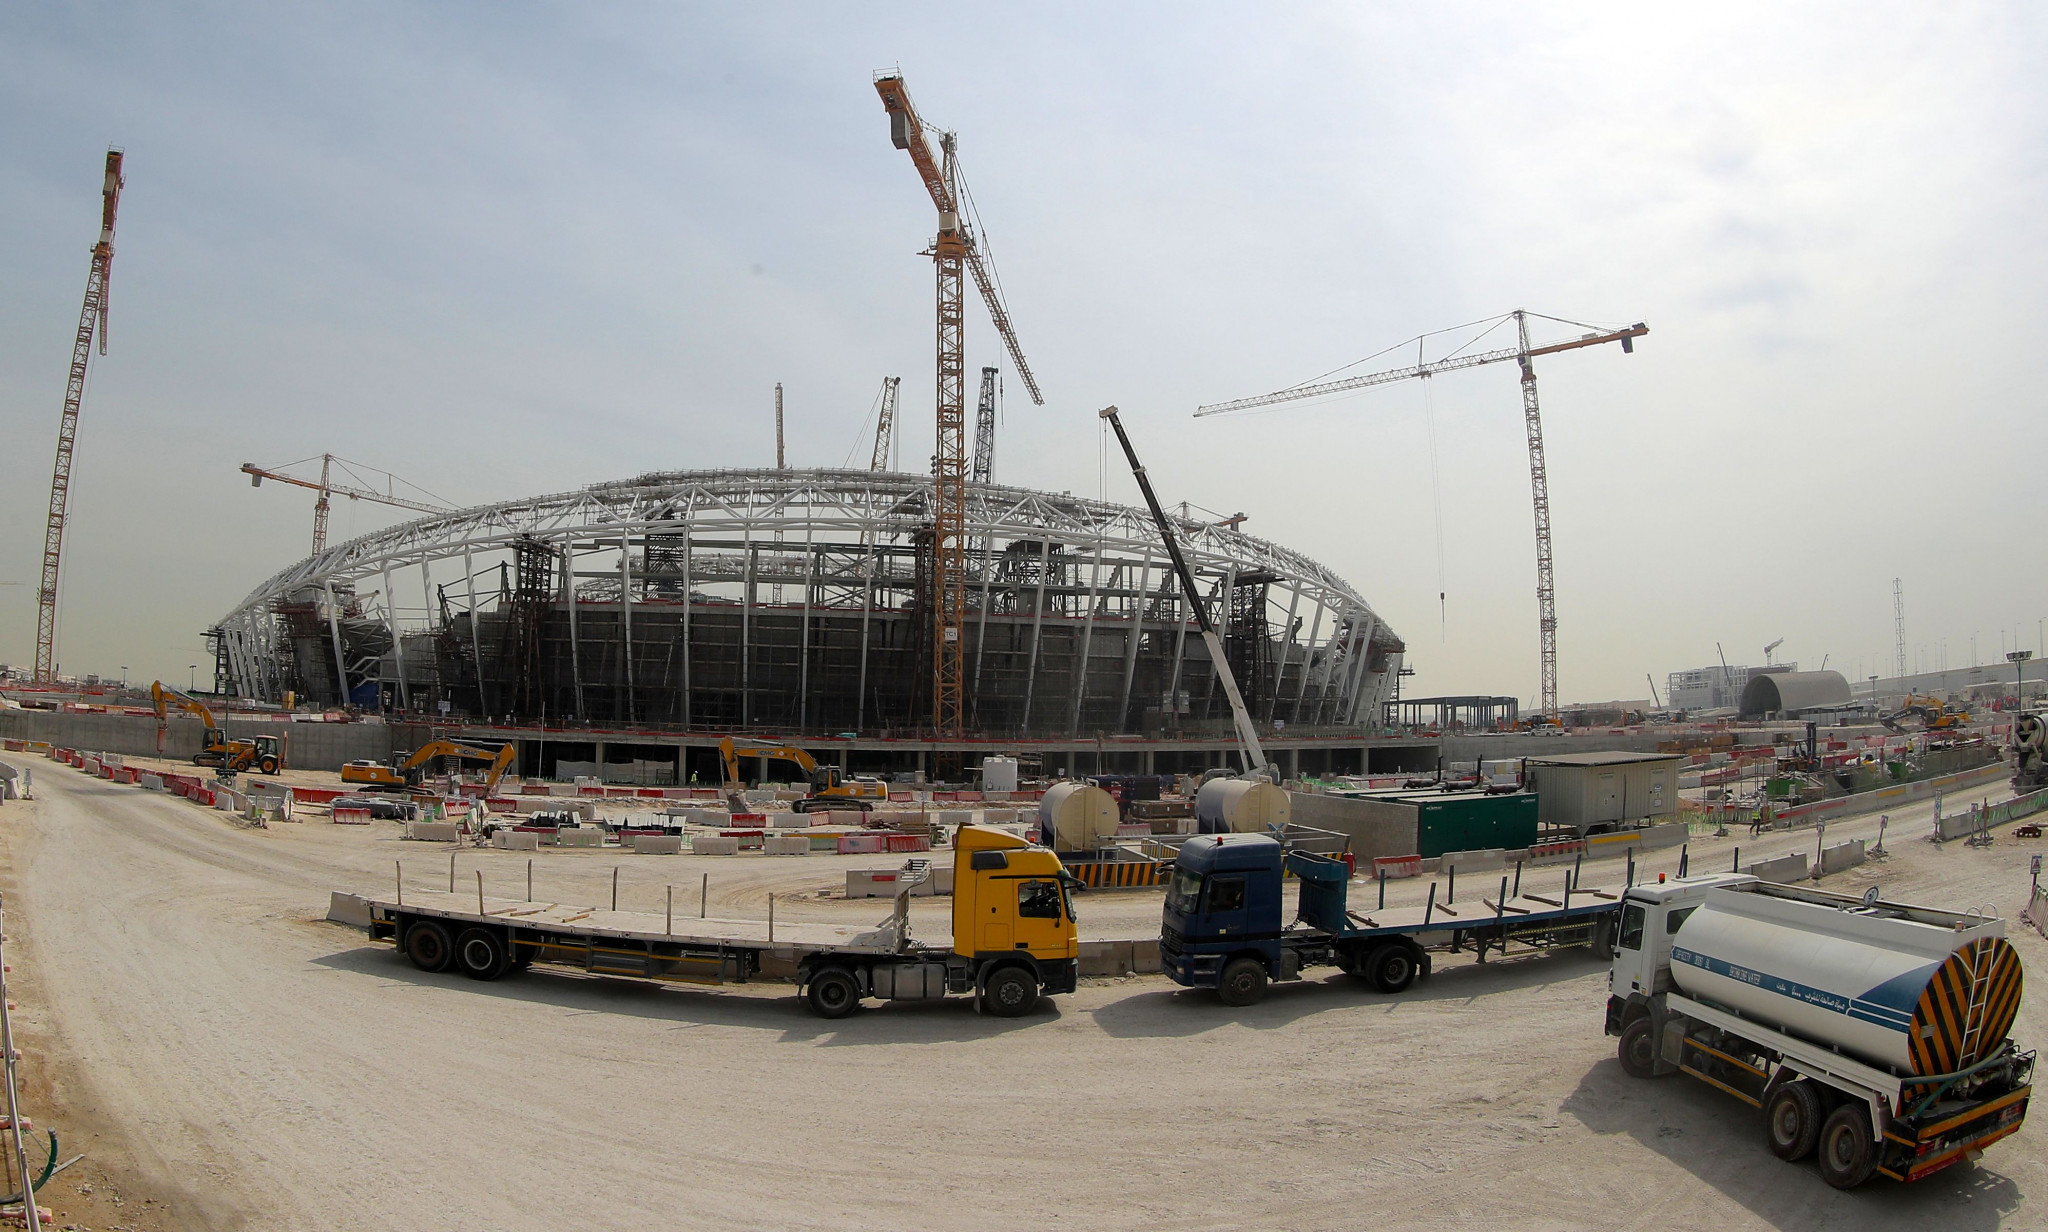 A campaign to support the rights of workers building Qatar 2022 World Cup stadiums has placed pressure on FIFA ©Getty Images